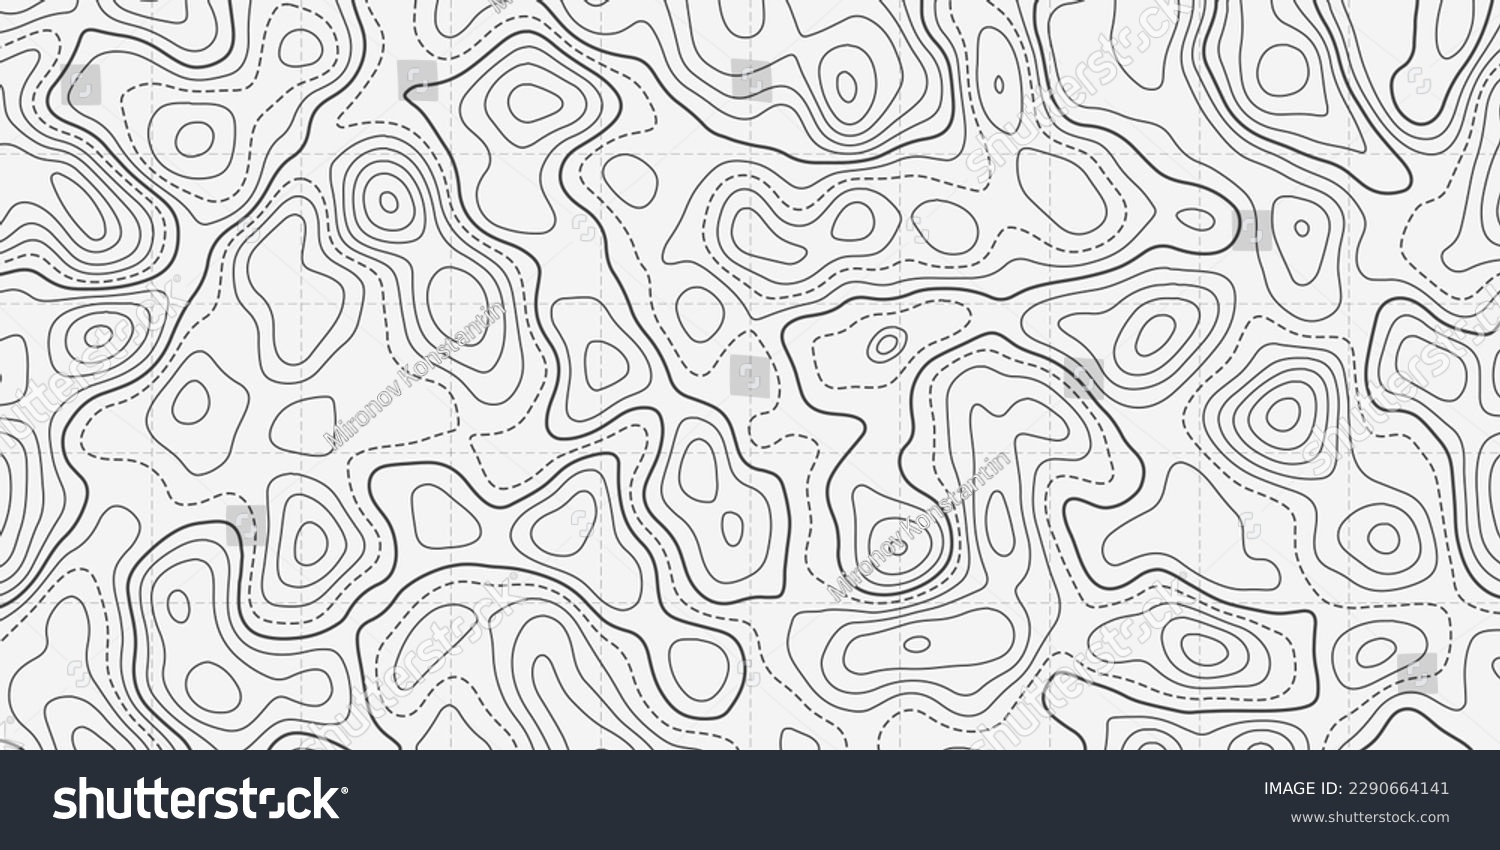 SVG of Ocean topographic line map with curvy wave isolines vector illustration. Sea depth topographic landscape surface for nautical radar readings. Cartography texture abstract banner of relief ocean floor. svg